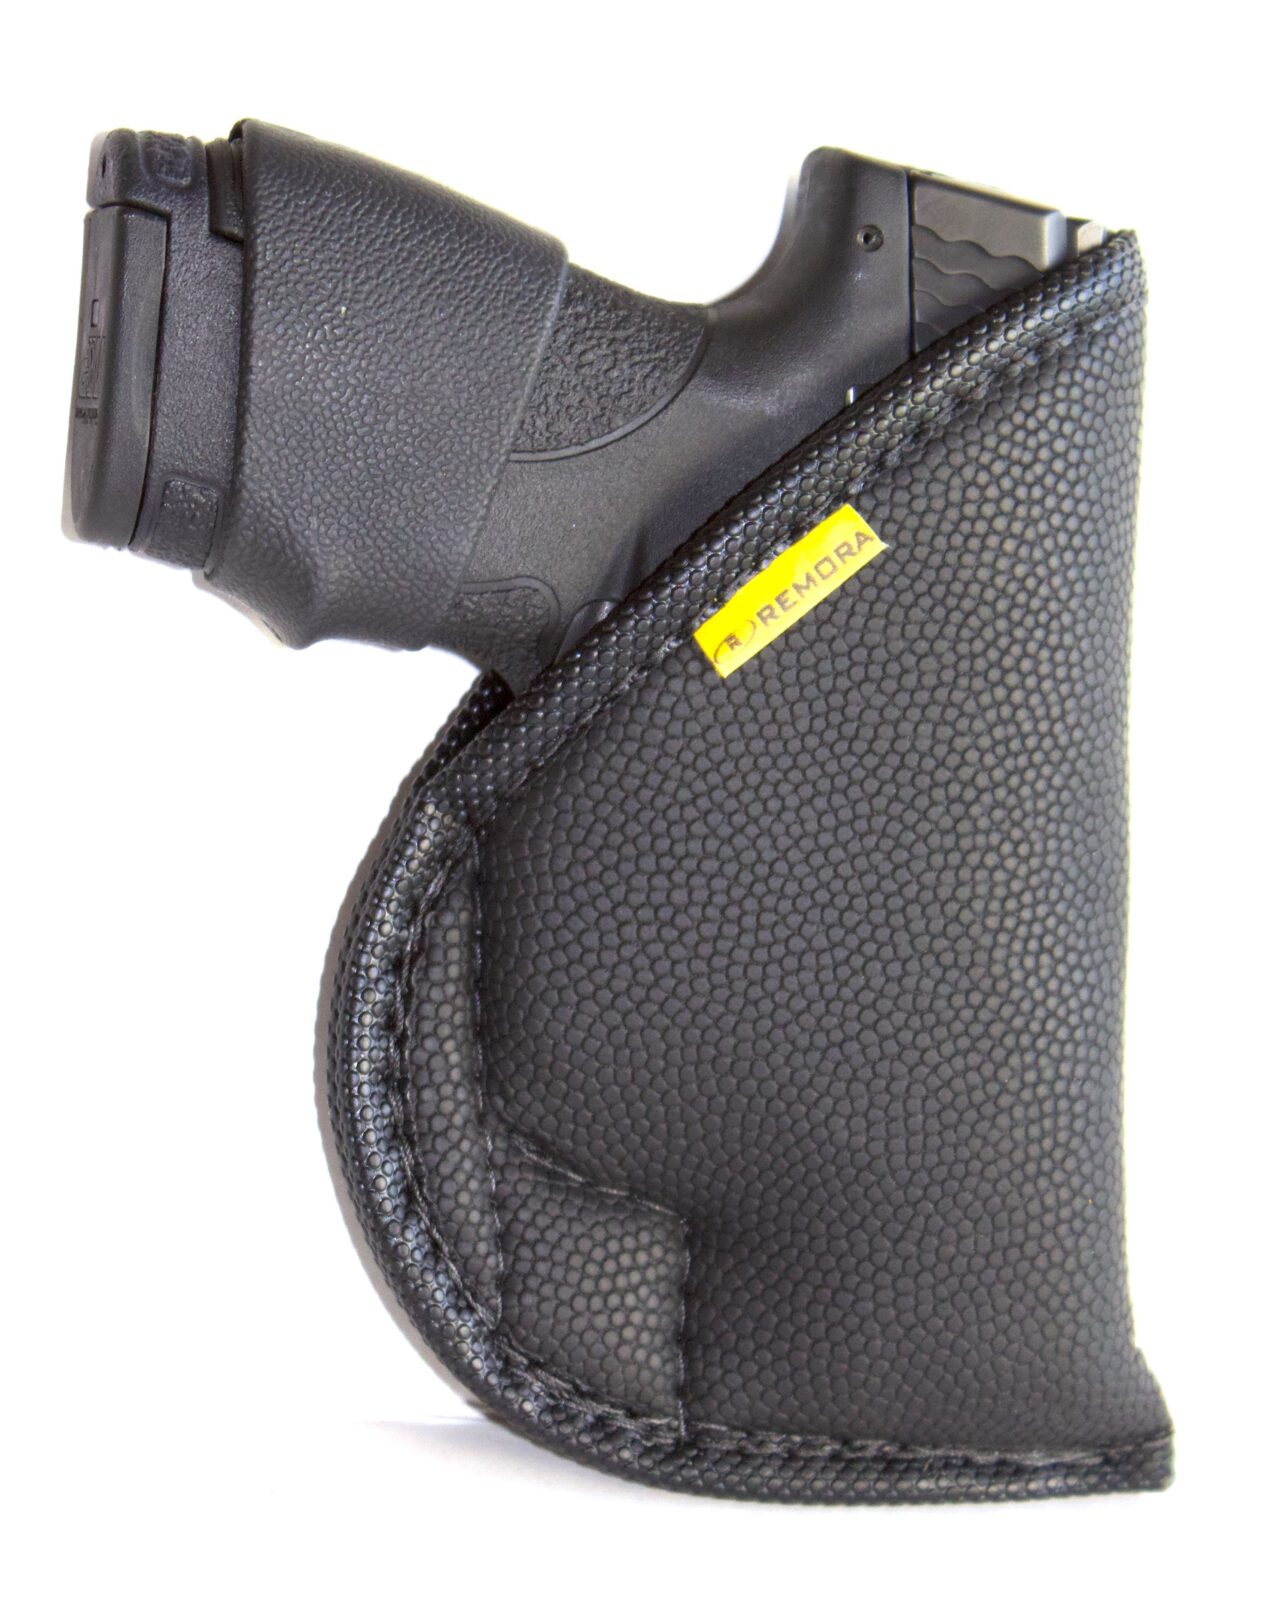 All frames of 1911 up to 5.0" barrel 12D-SS Remora LH Non-Slip IWB Holster 